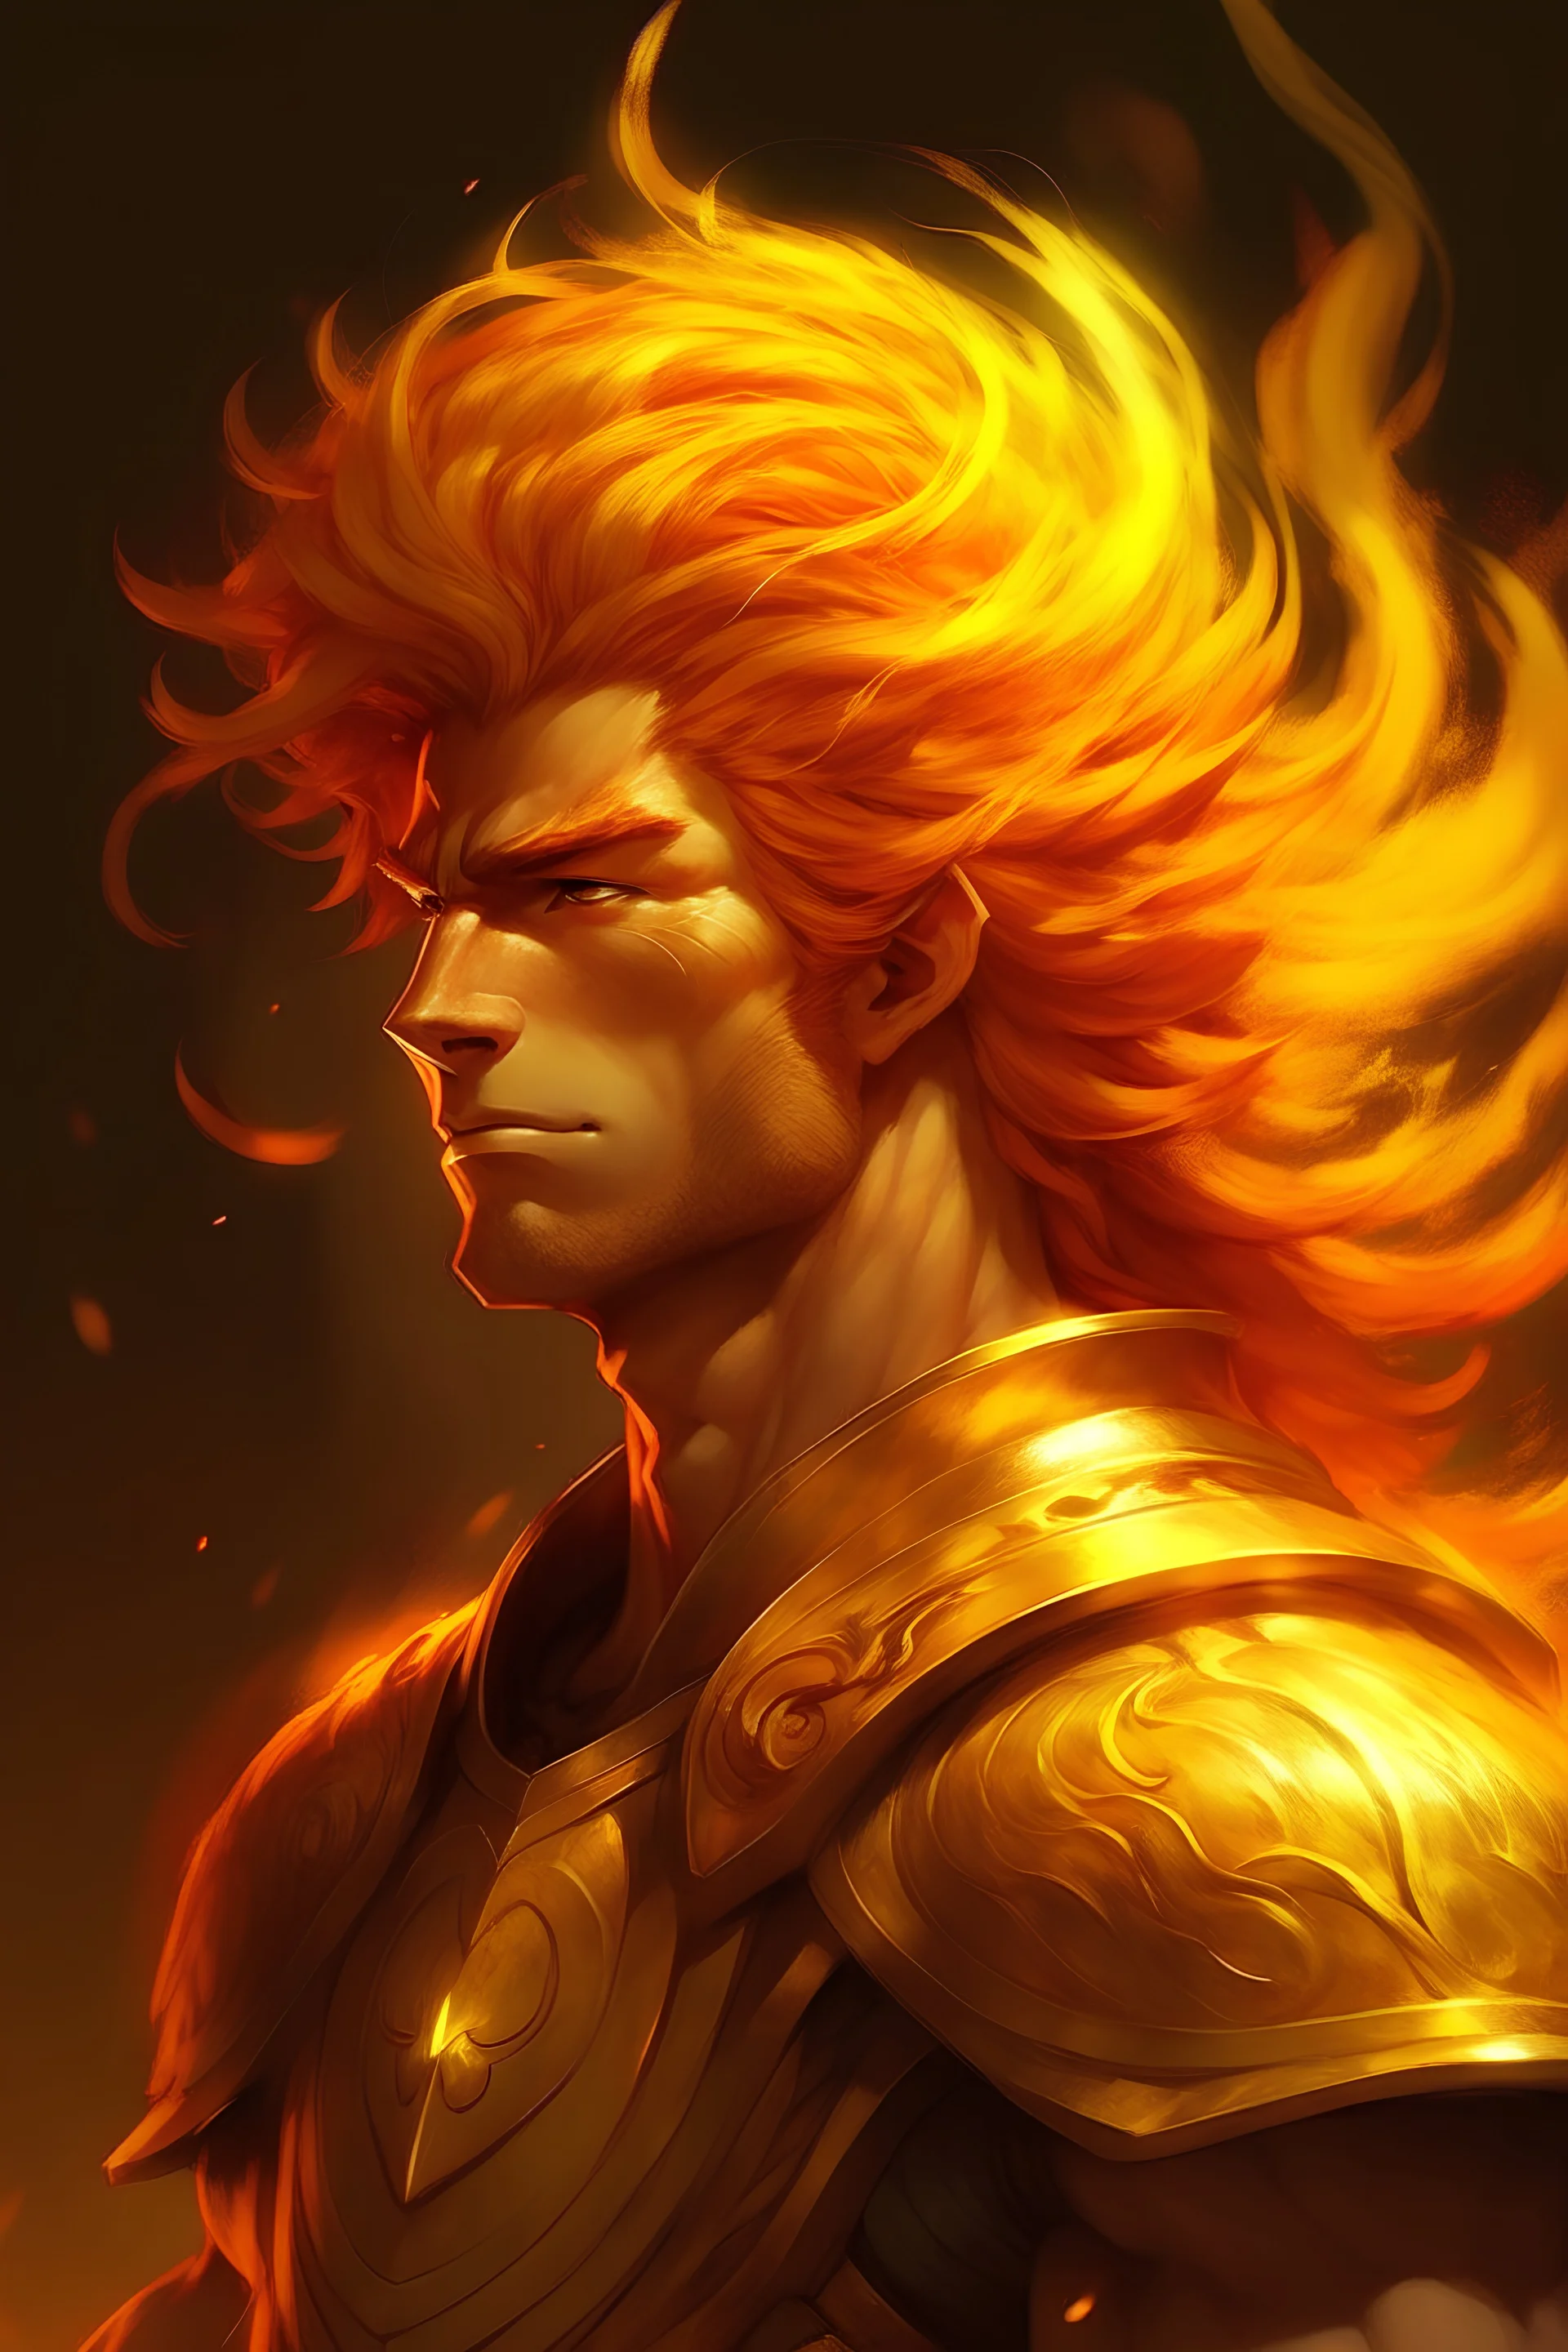 His hair is golden and looks like it's blazing fire. He had a majestic appearance like a Roman emperor. He had broad shoulders and strong muscles.